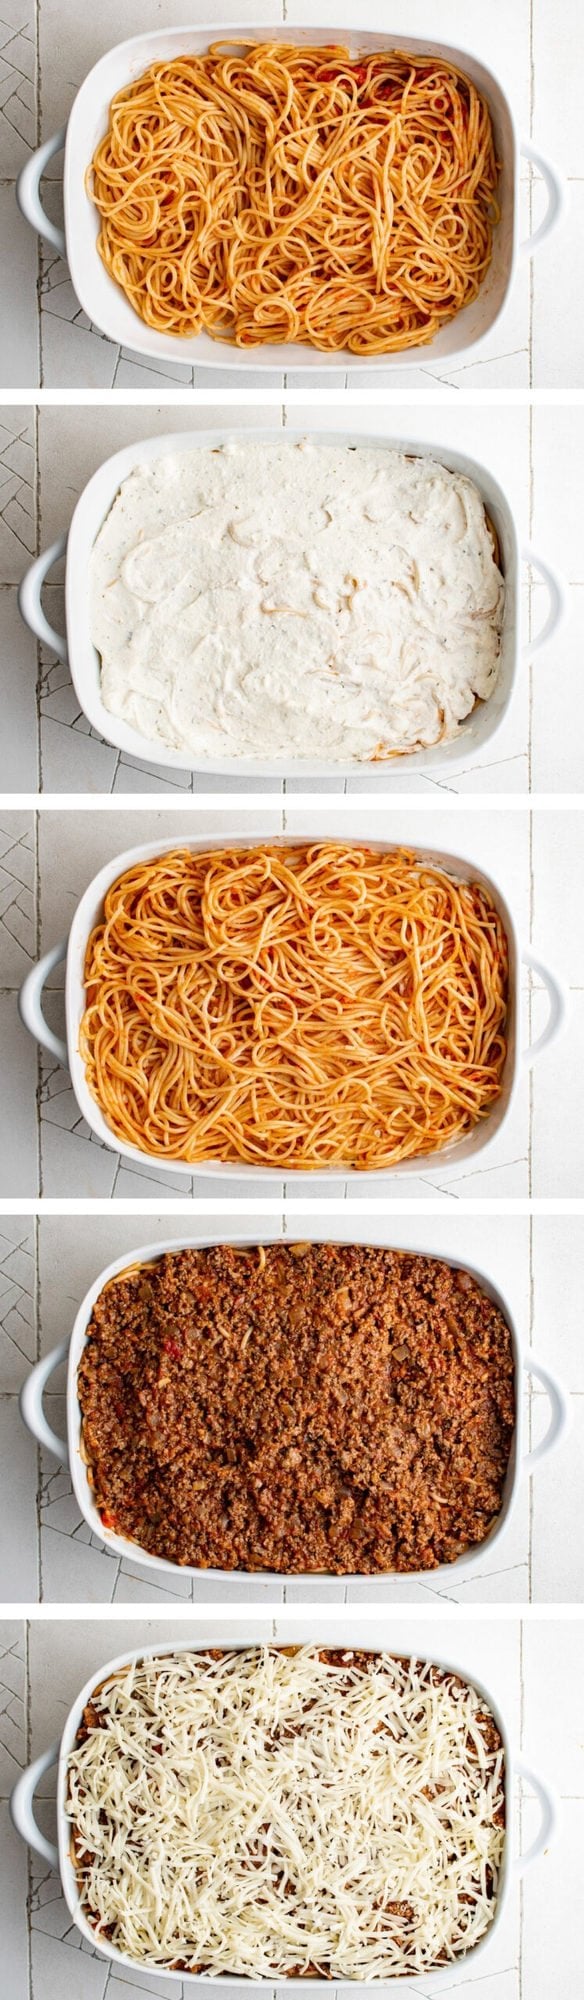 collage of images showing layers of spaghetti casserole